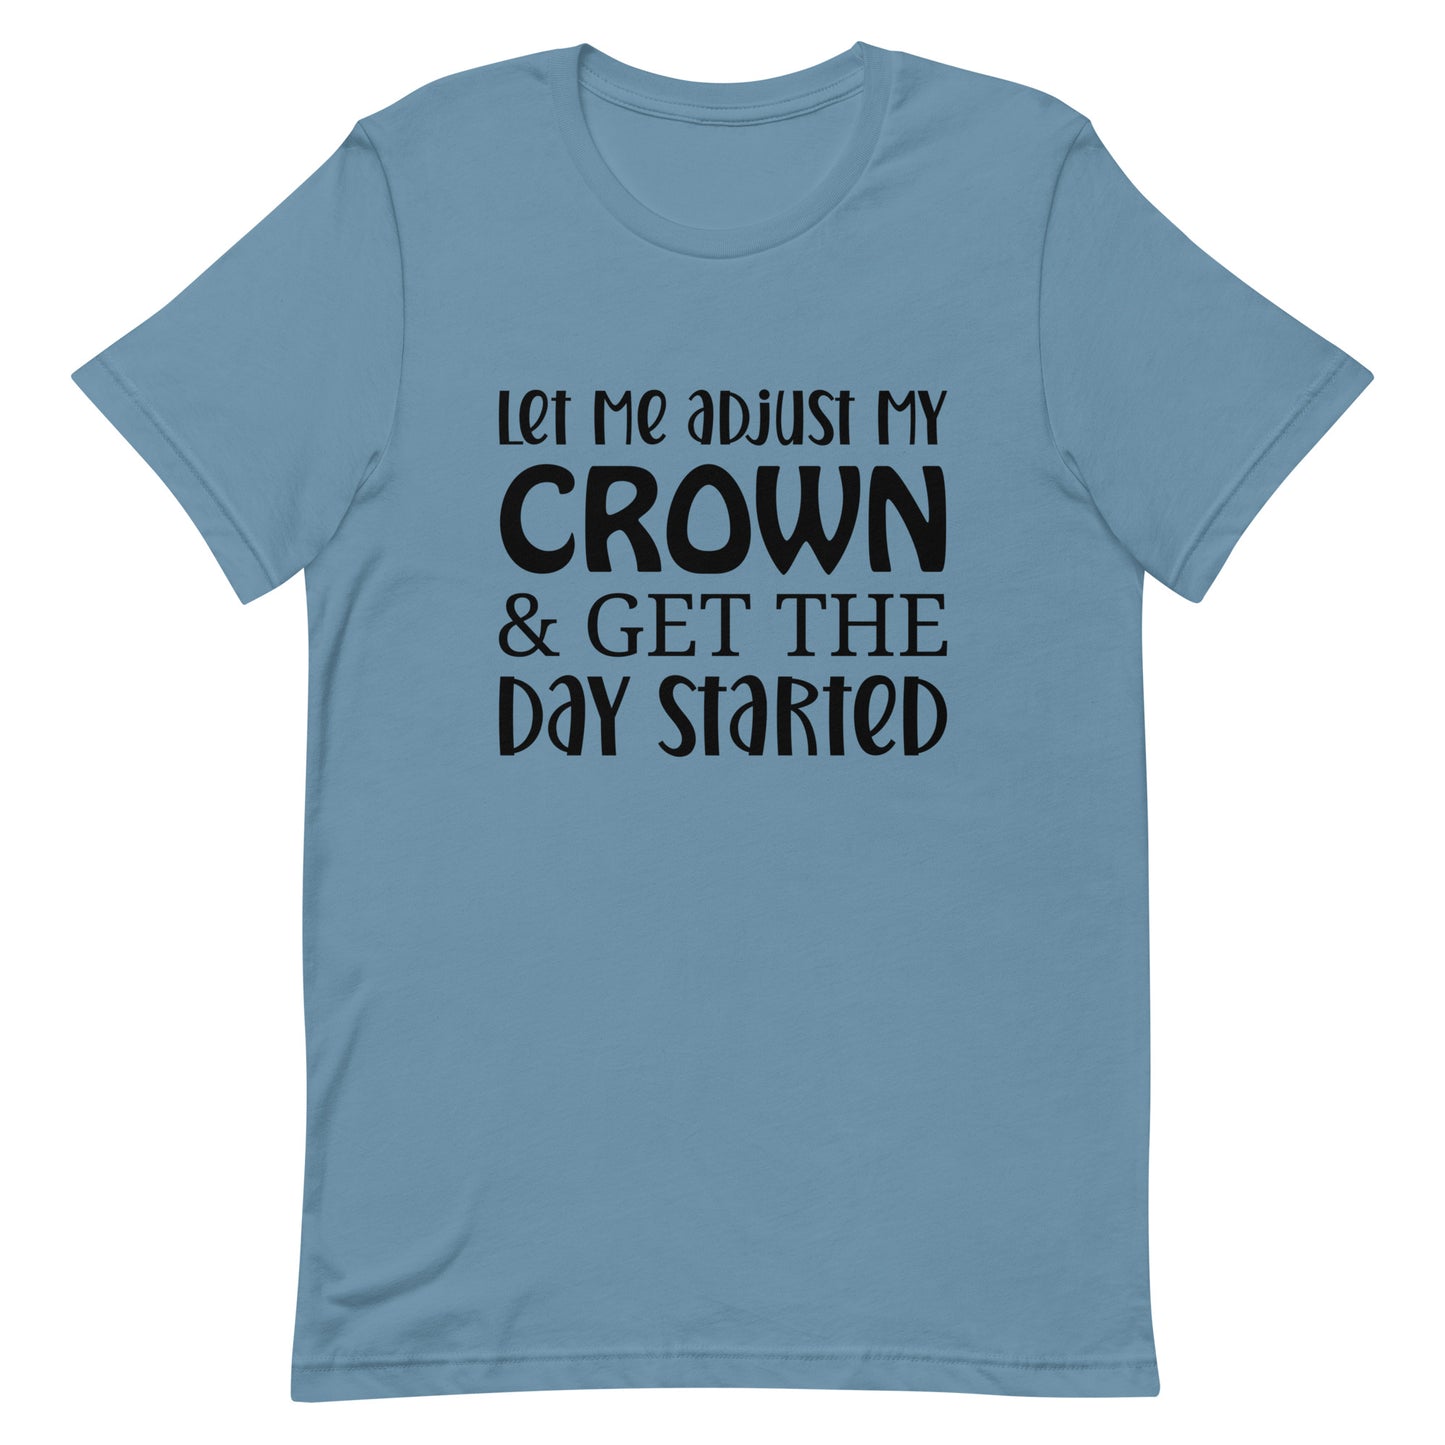 Let Me Adjust my Crown & Get the Day Started Unisex t-shirt